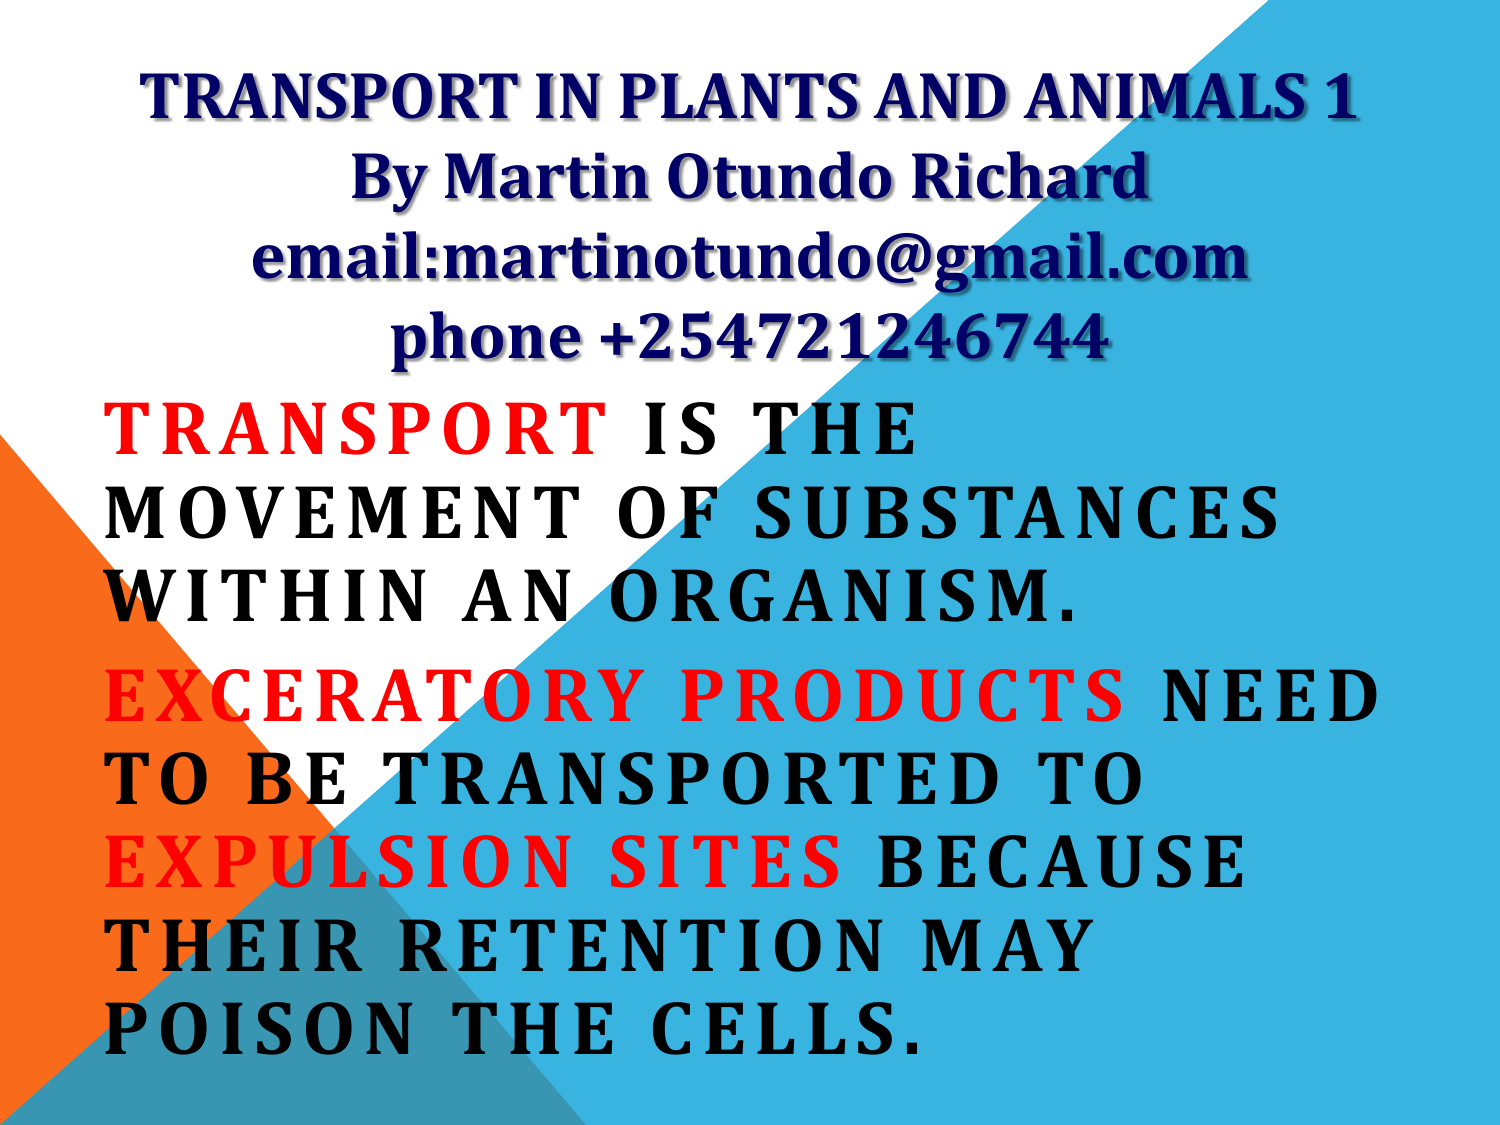 BIOLOGY TRANSPORT IN ANIMALS AND PLANTS BY DR. MARTIN OTUNDO RICHARD